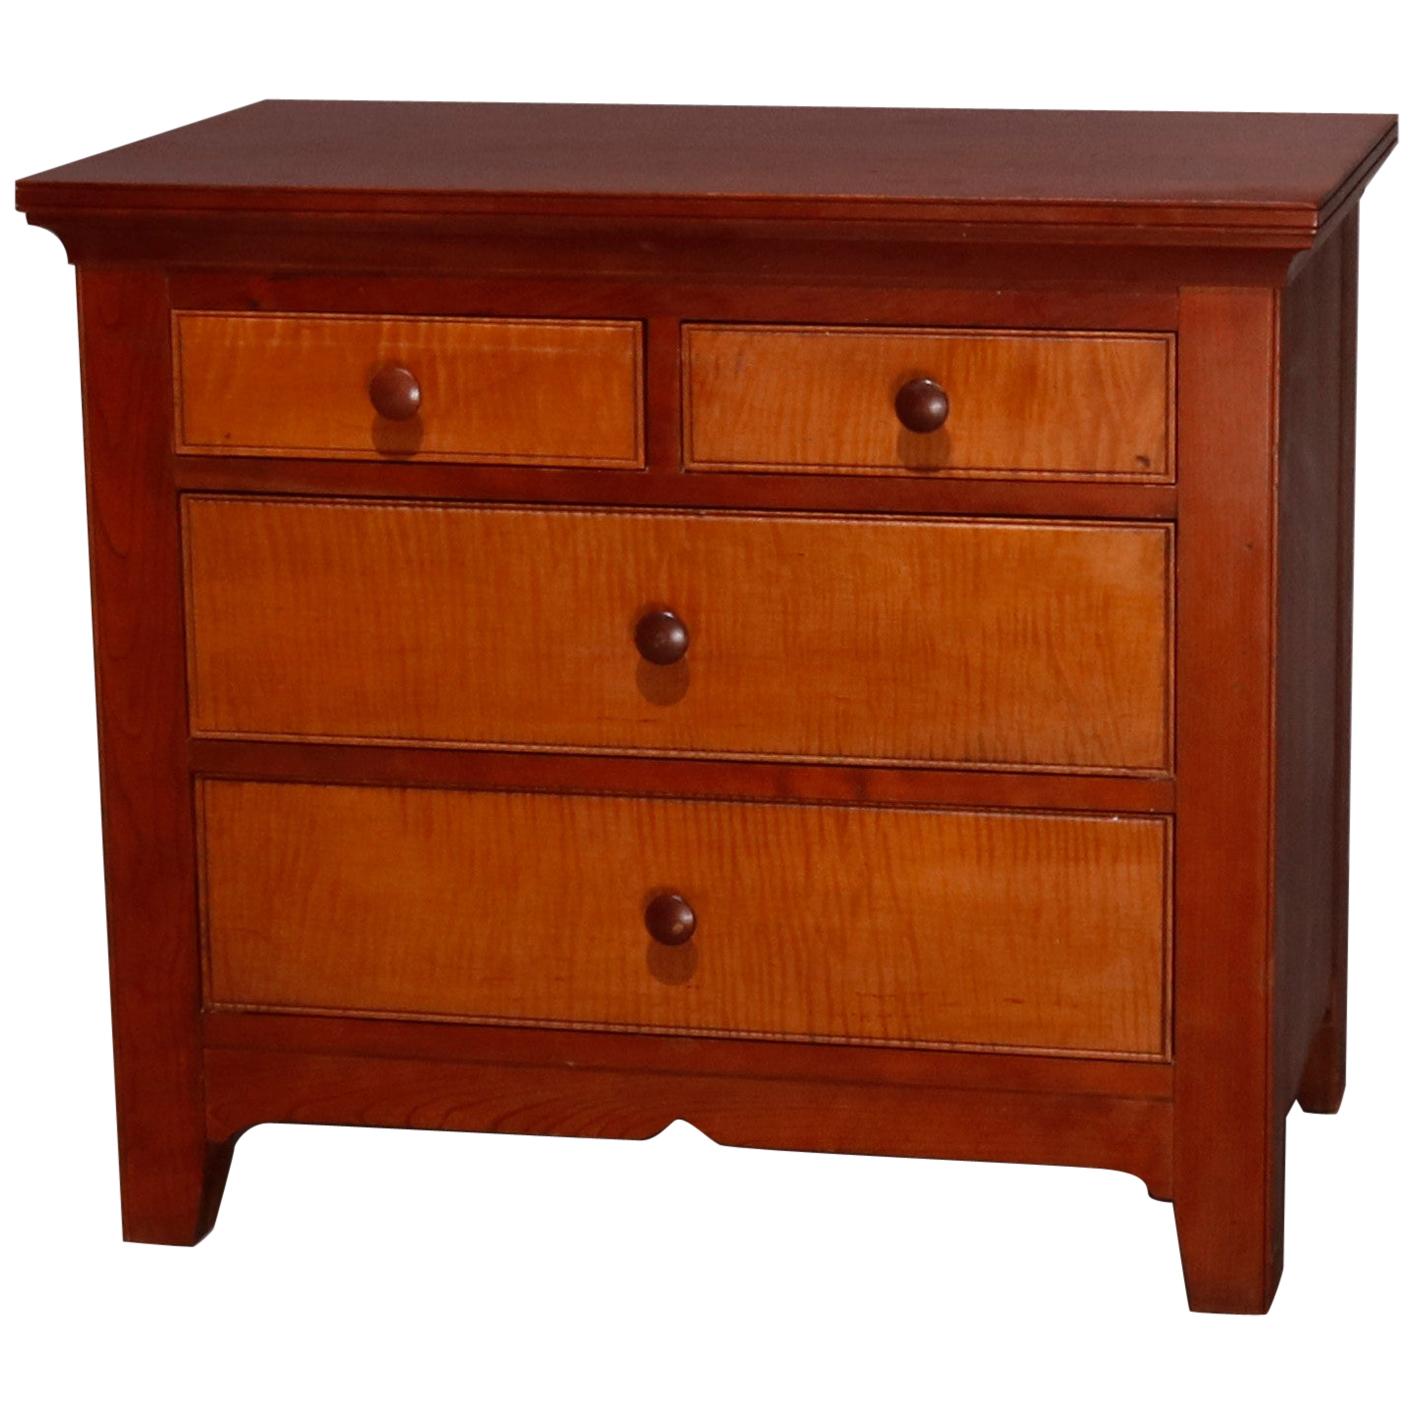 Americana Shaker Style Cherry and Tiger Maple Diminutive 4-Drawer Chest